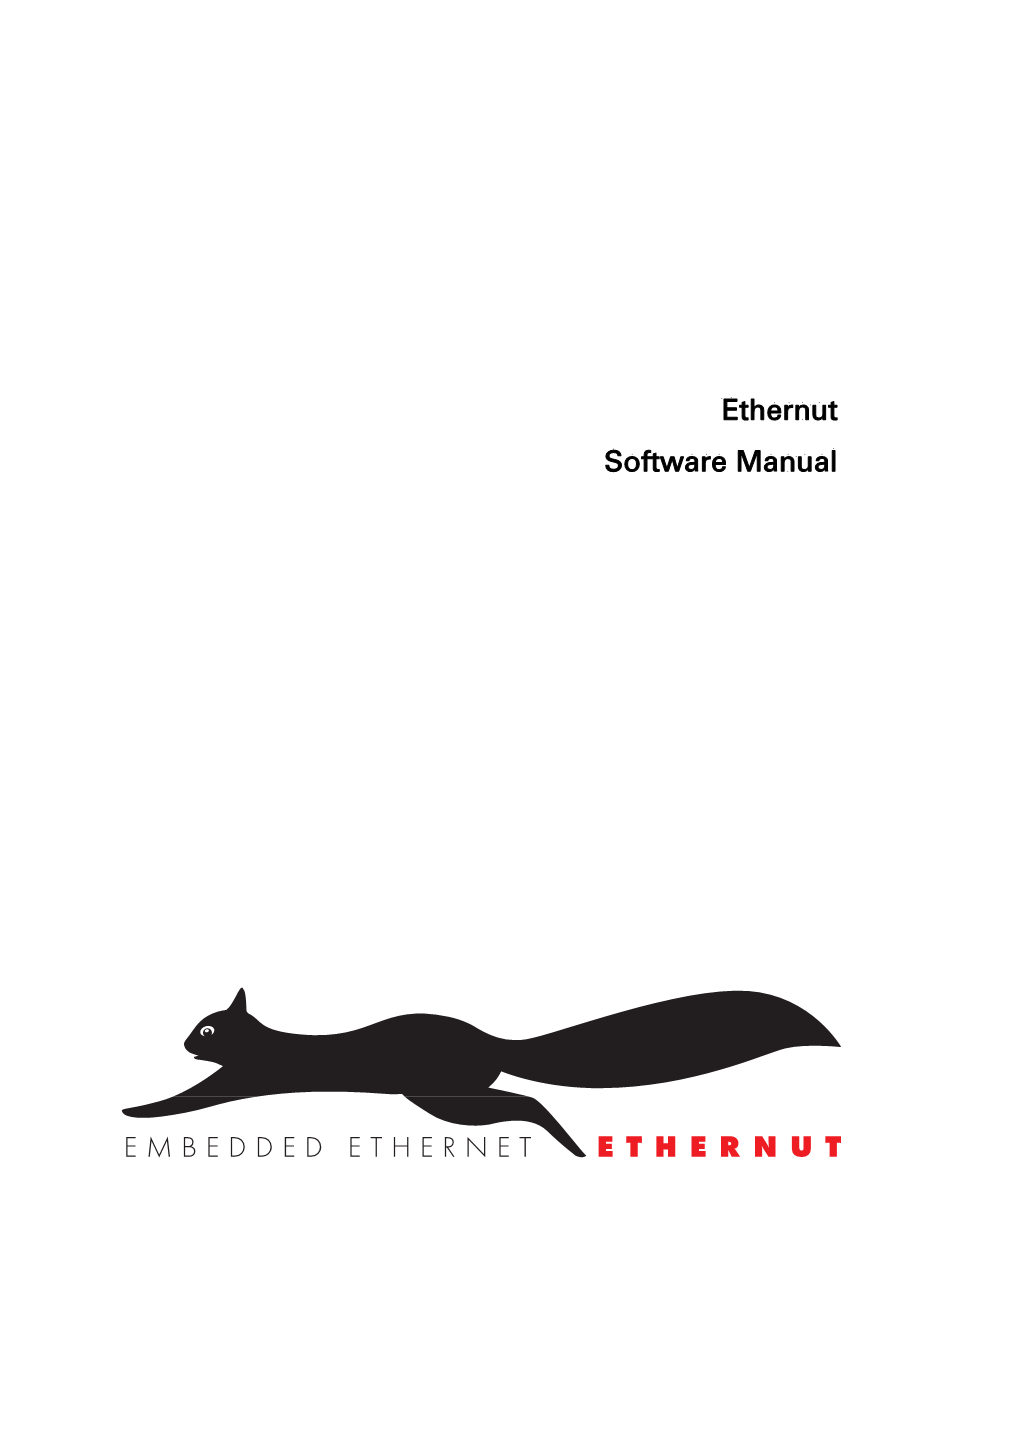 Ethernut Software Manual Manual Revision: 2.4 Issue Date: November 2005